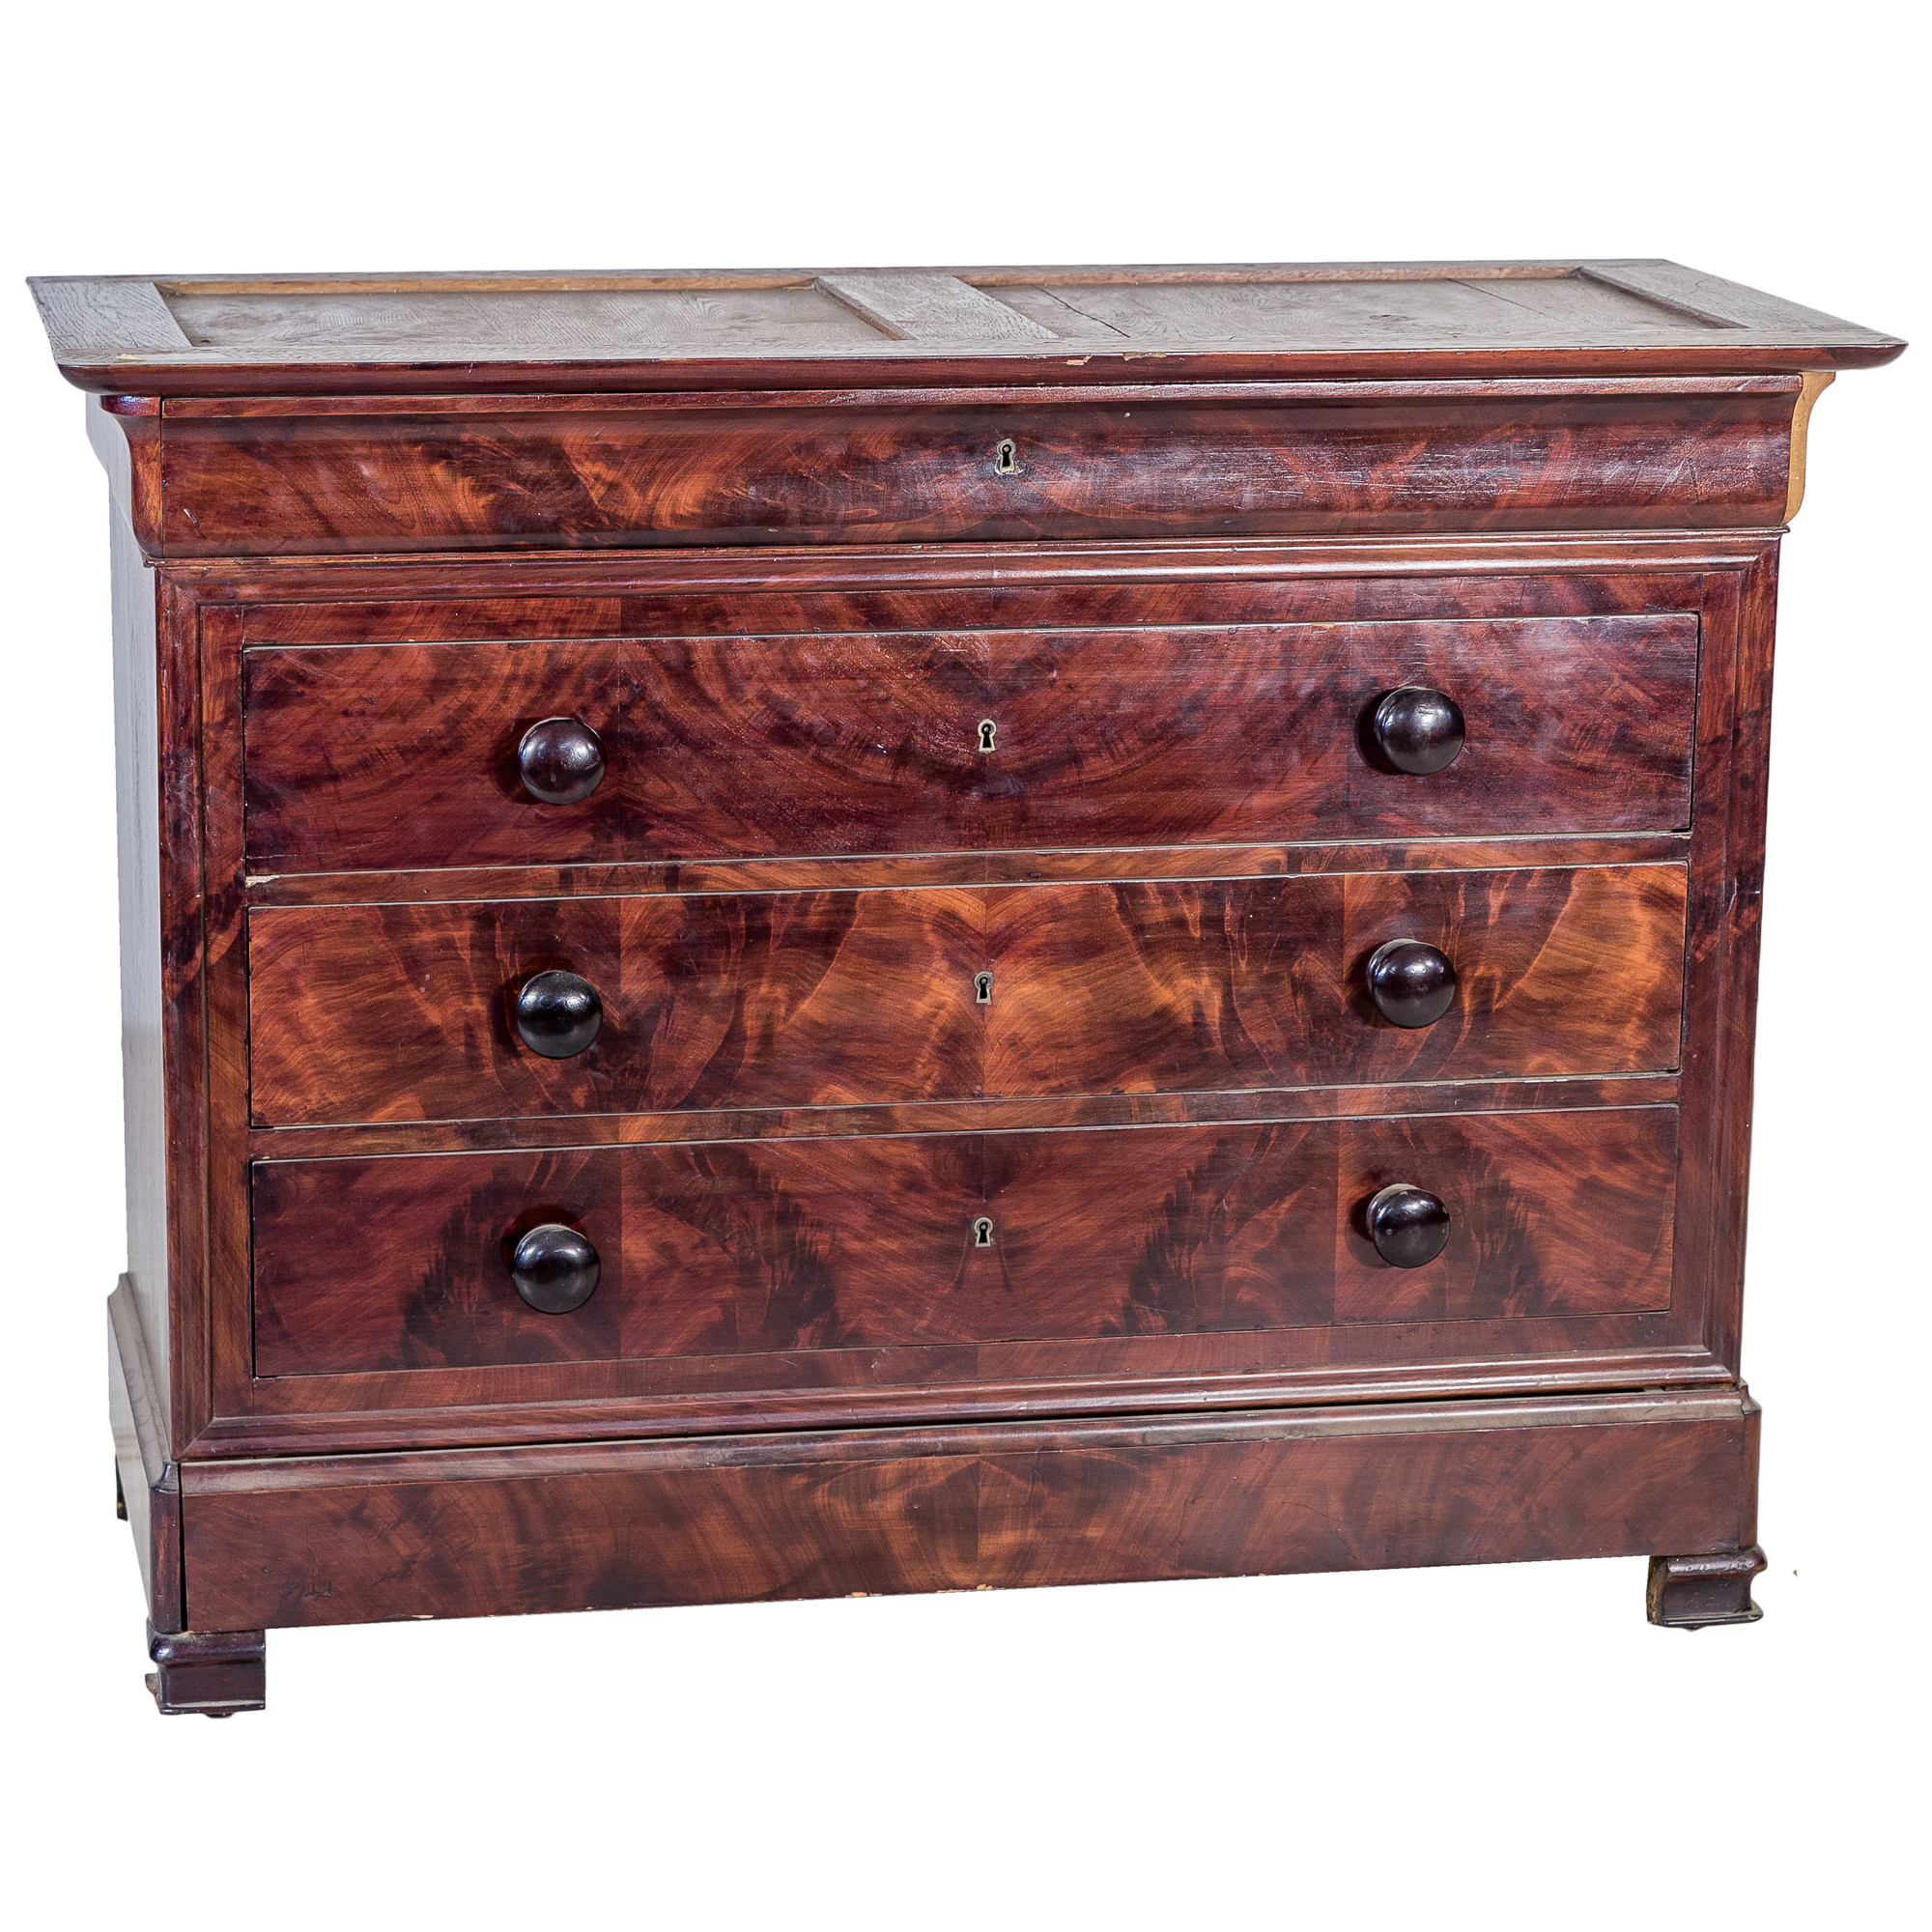 'Late 19th Century Flame Mahognay Commode Lacking Marble Top'